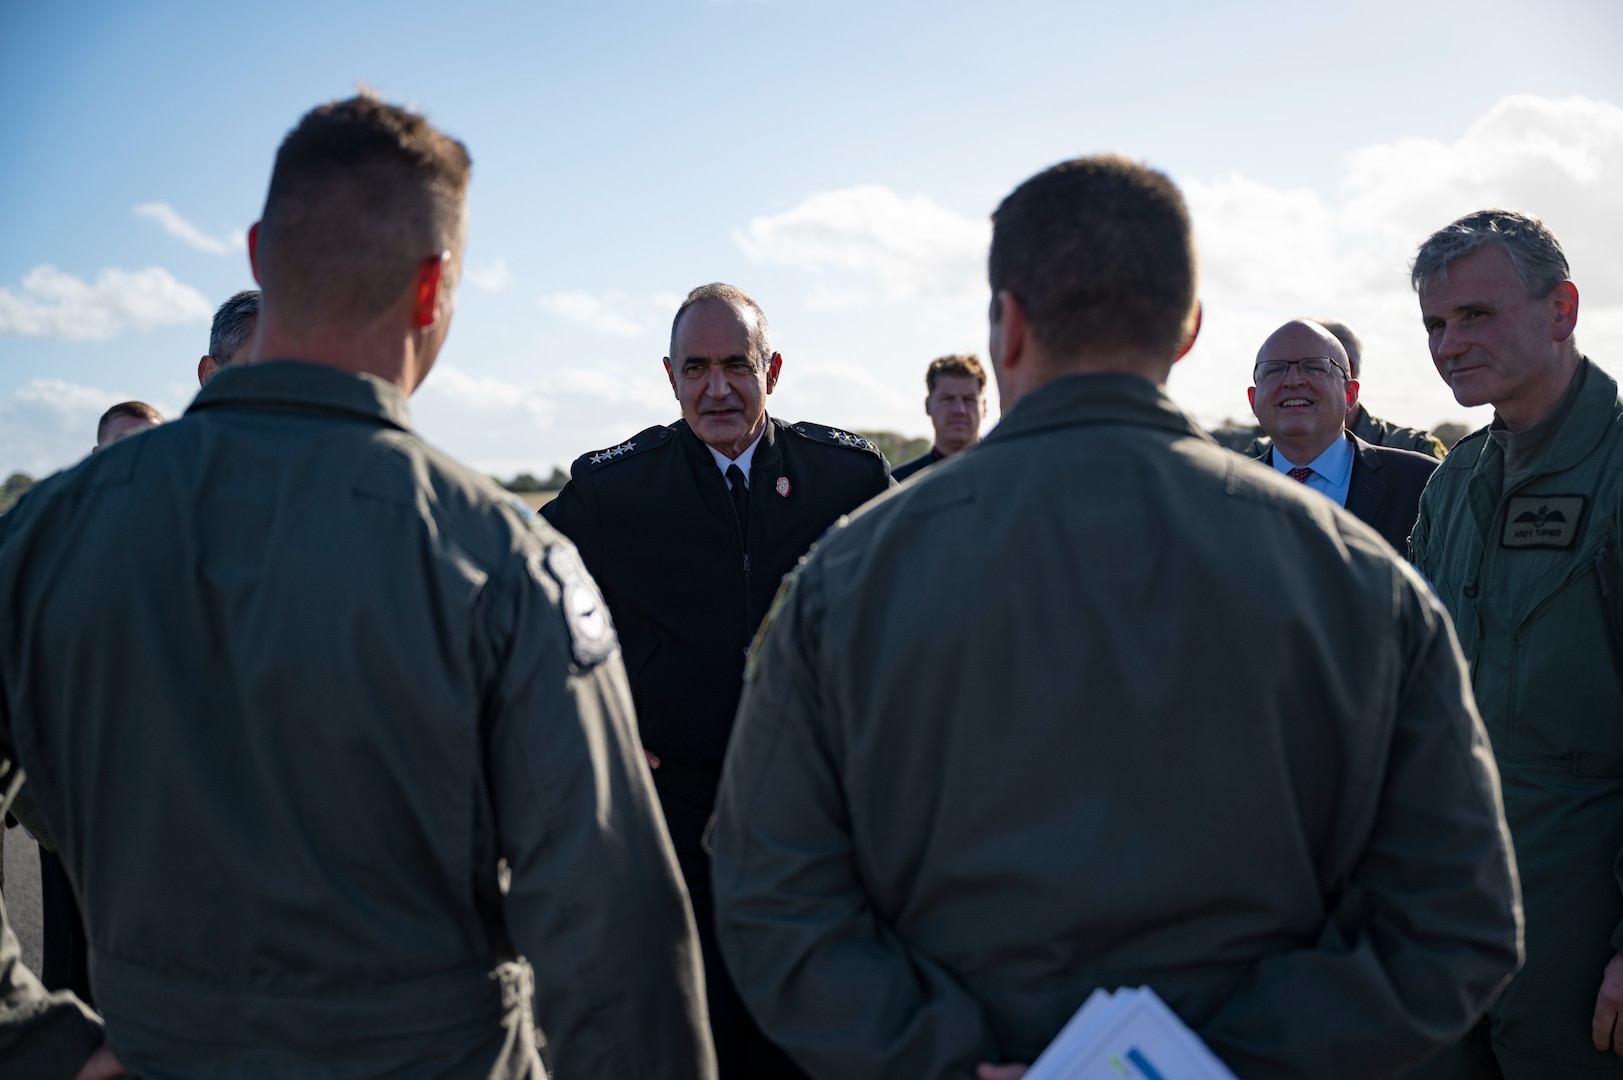 Senior leaders from the Ministry of Defence and USSTRATCOM meet during a Bomber Task Force mission demonstration at RAF Fairford on Oct. 19, 2021. (Courtesy Photo)